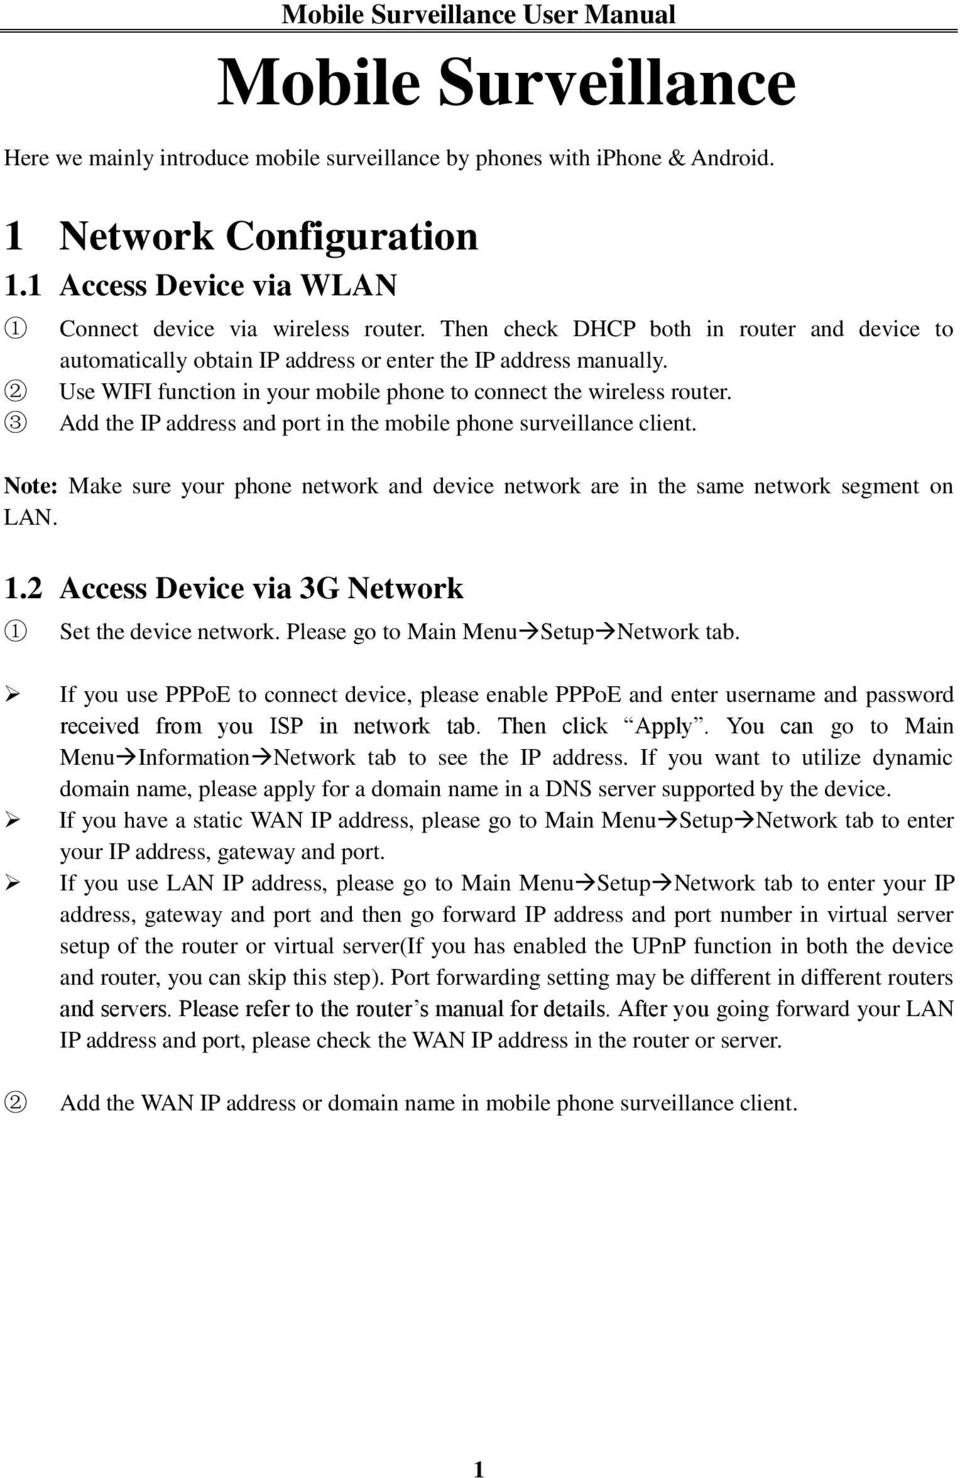 Add the IP address and port in the mobile phone surveillance client. Note: Make sure your phone network and device network are in the same network segment on LAN. 1.